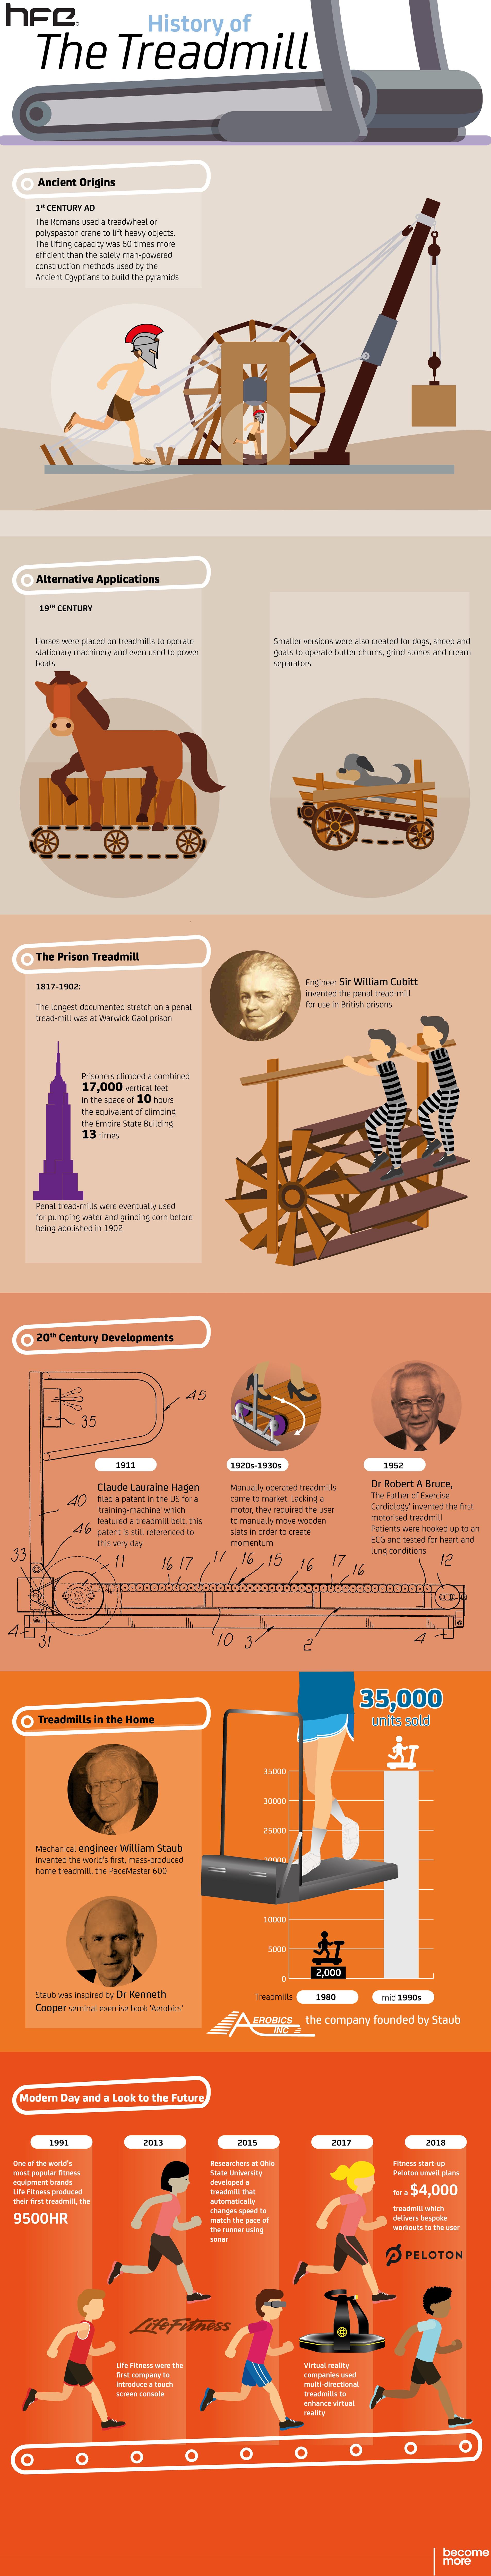 HFE's history of the treadmill infographic